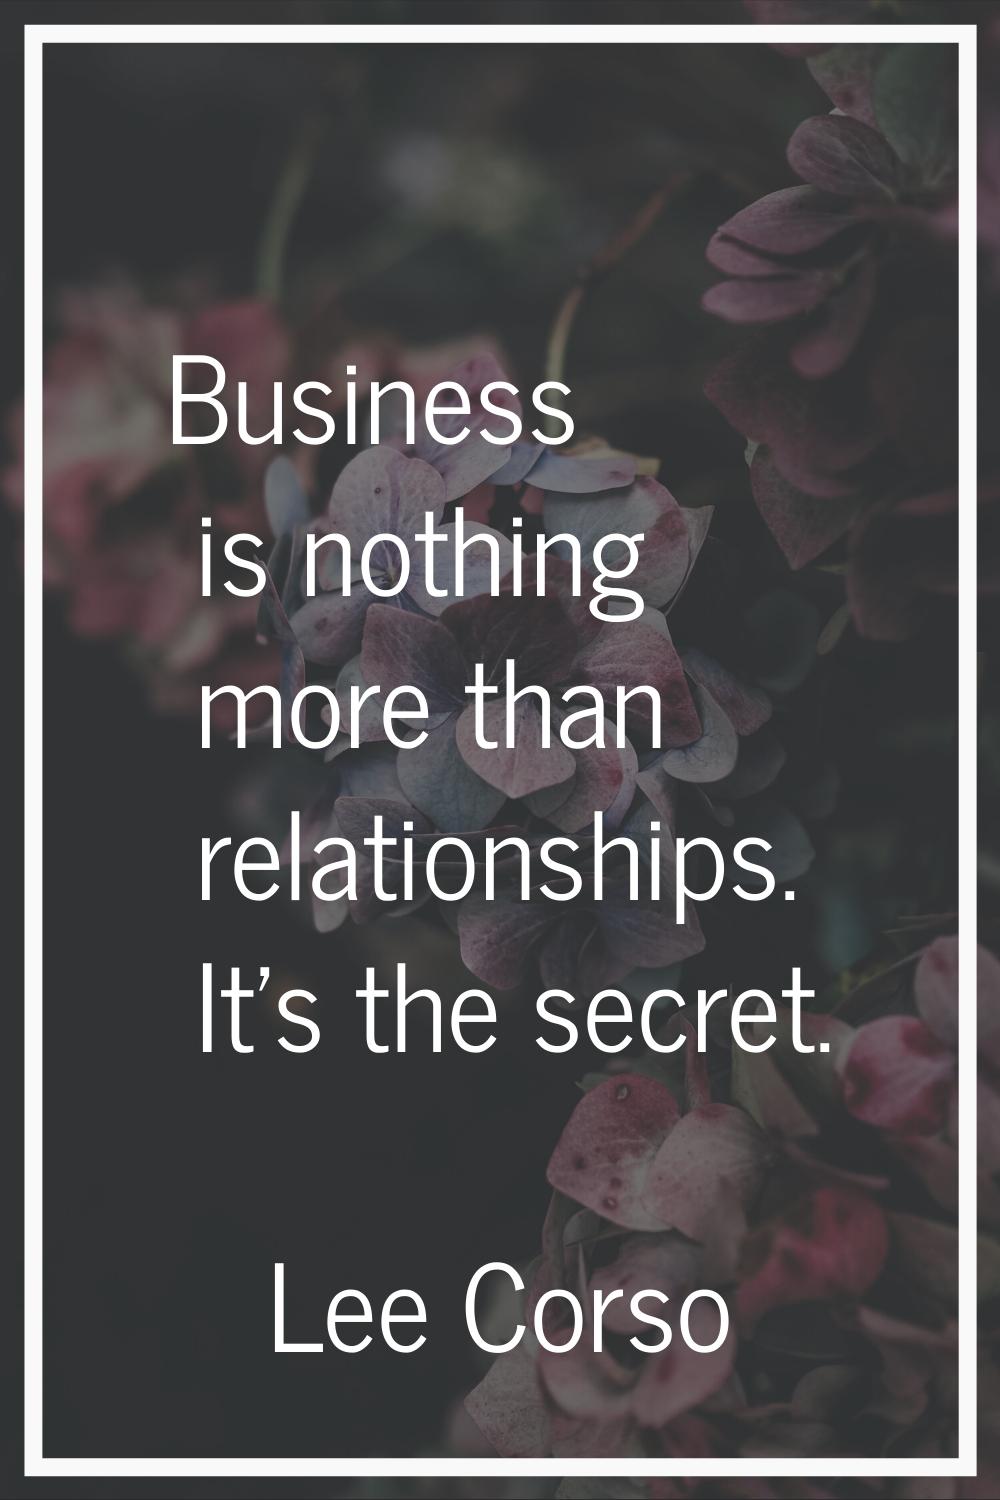 Business is nothing more than relationships. It's the secret.